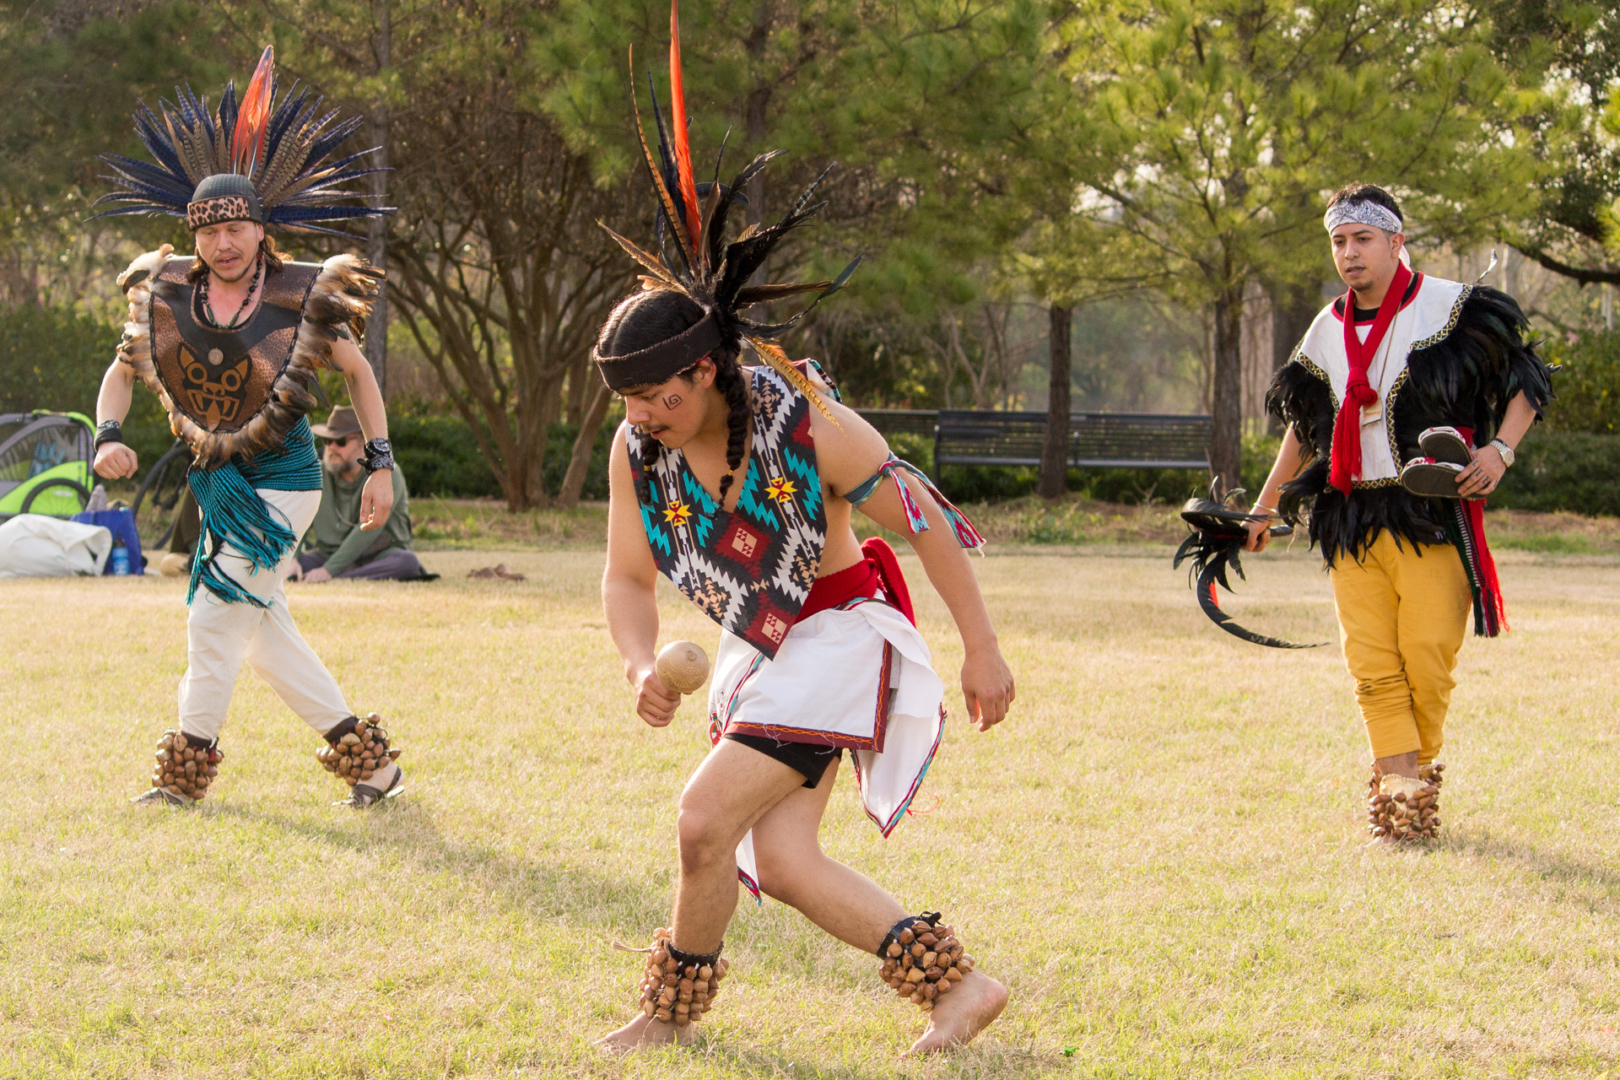 Jesus Navarro (left), Mauricio Turrubiartes III (center) and Uriel Garcia-Vega (right) of the Houston Aztec Dance group partake in a traditional dance ceremony to honor the last Mexica-Aztec tlatoani-leader, Cuauhtémoc. The group meets weekly to learn the Aztec traditions and ceremonies as a way to reconnect with their indigenous heritage. | Katrina Martinez/The Cougar